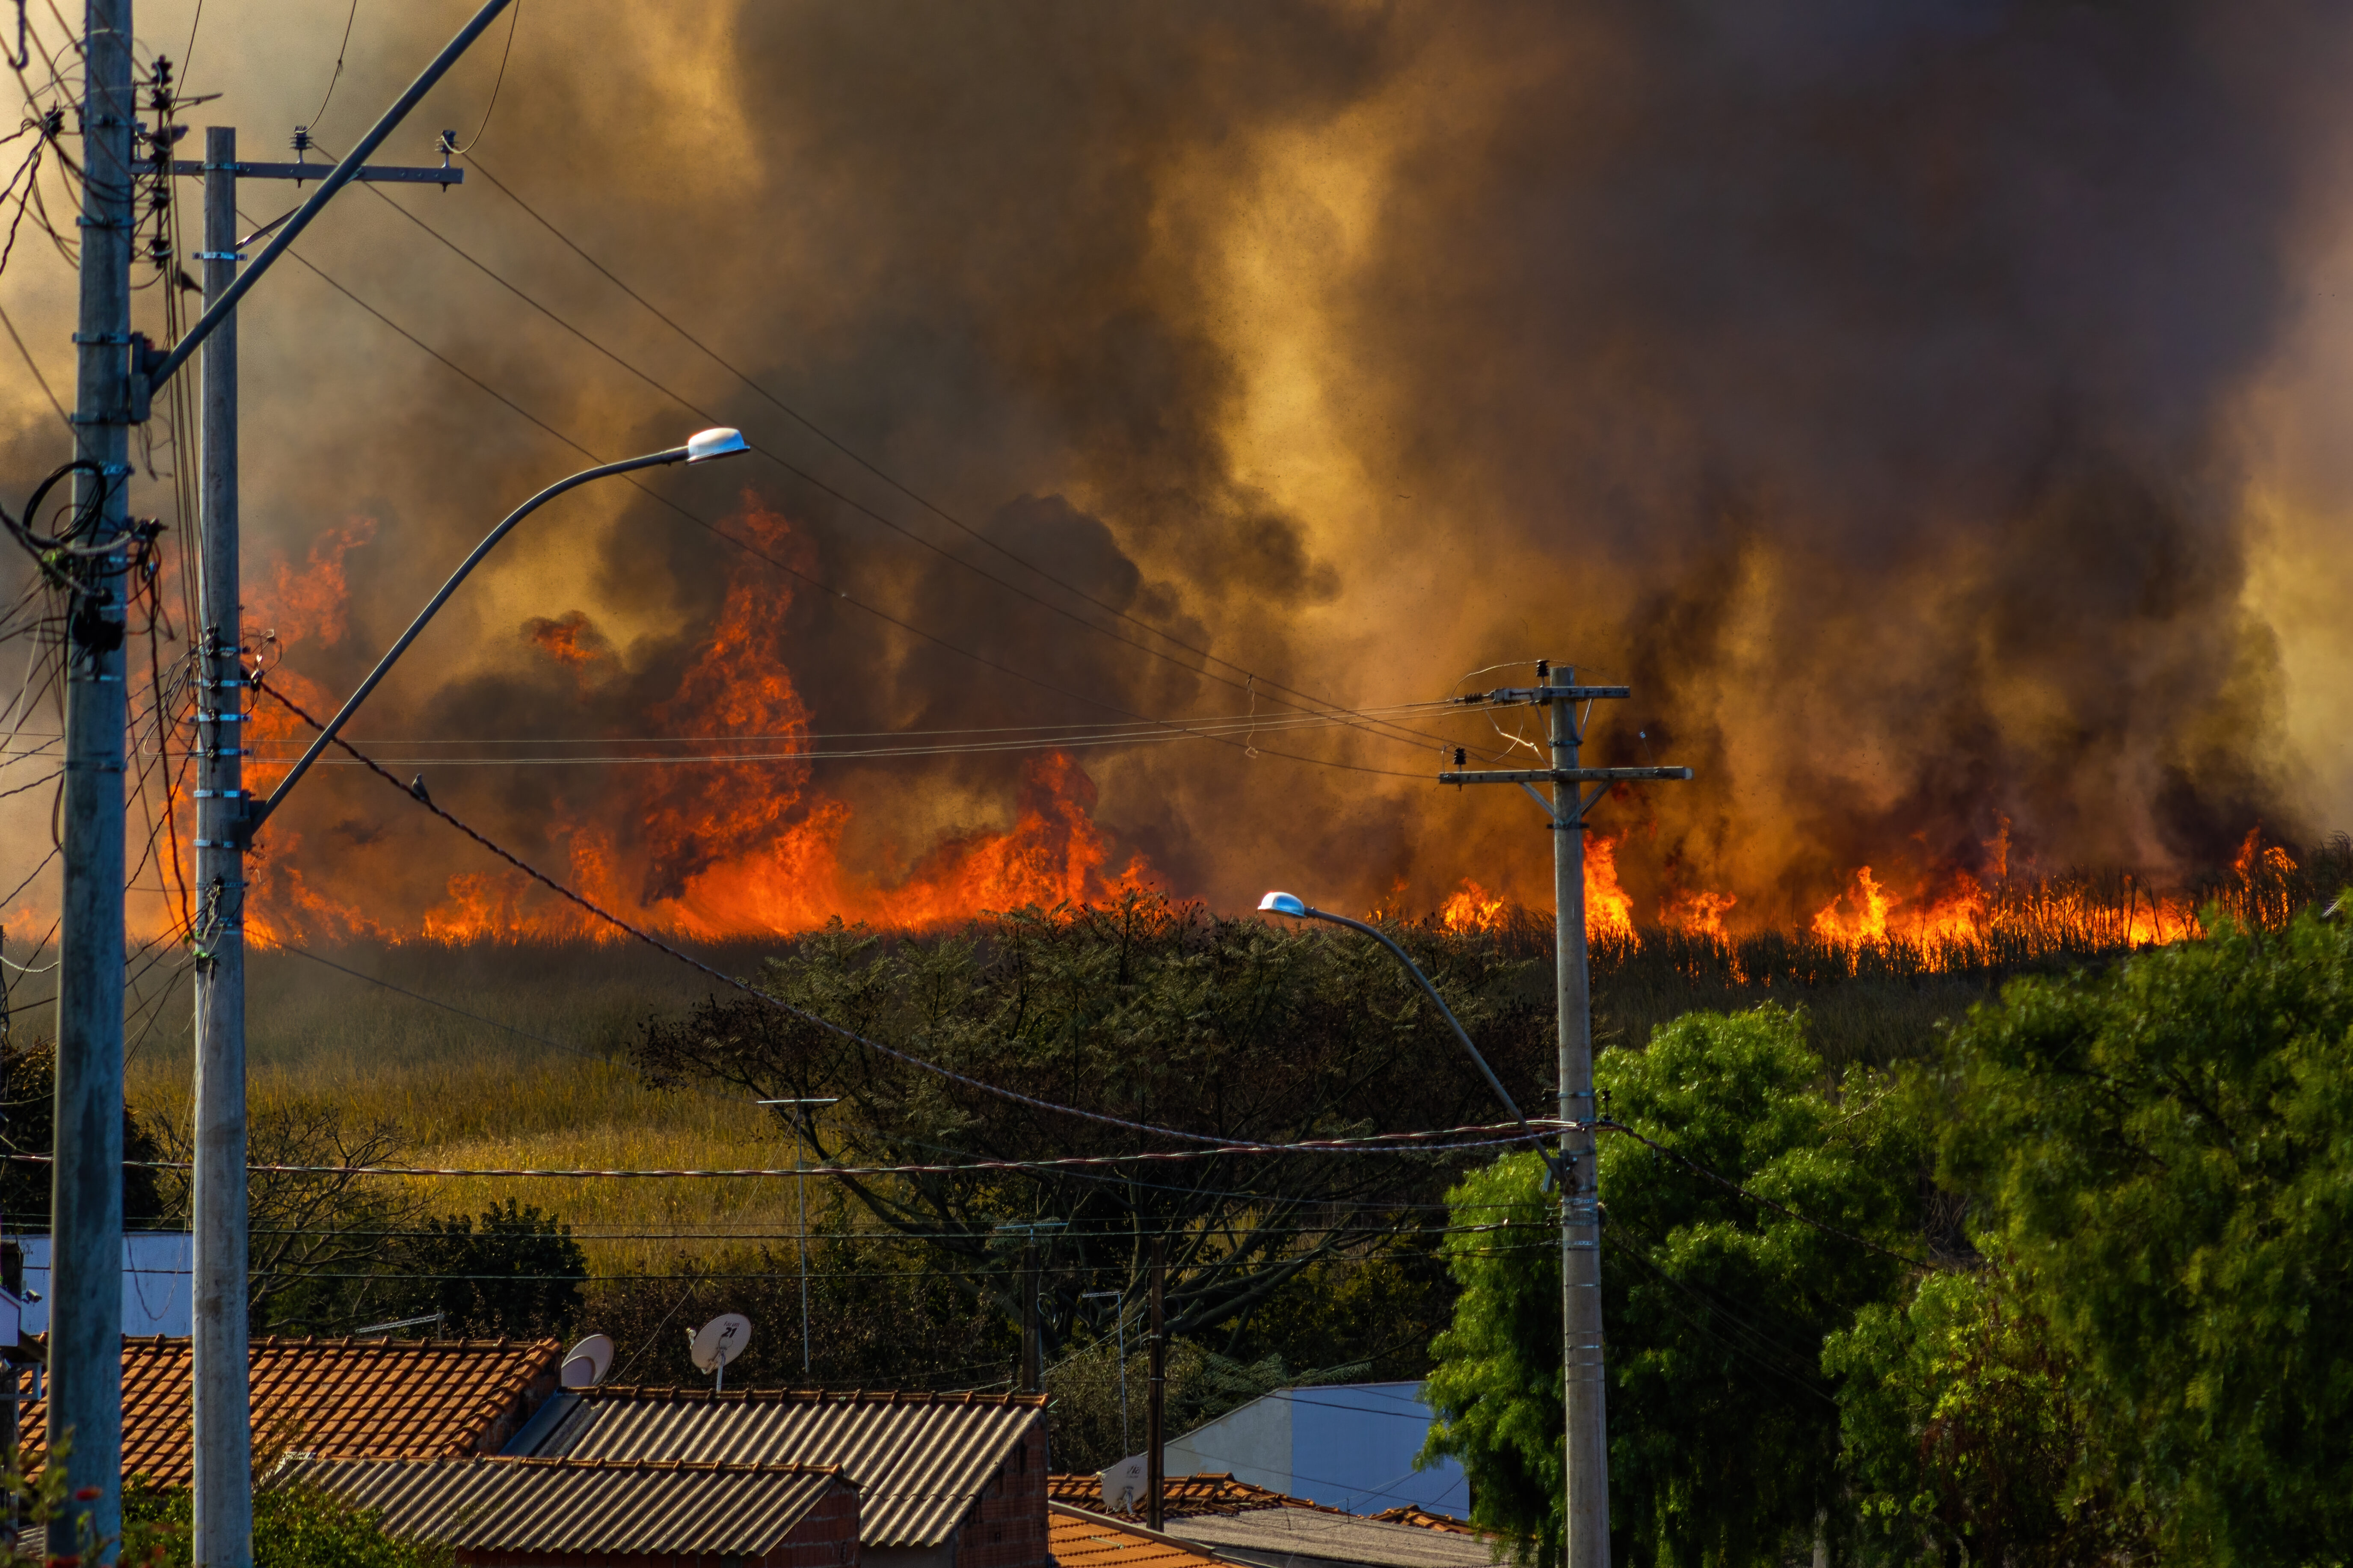 A wildfire burning green field near houses